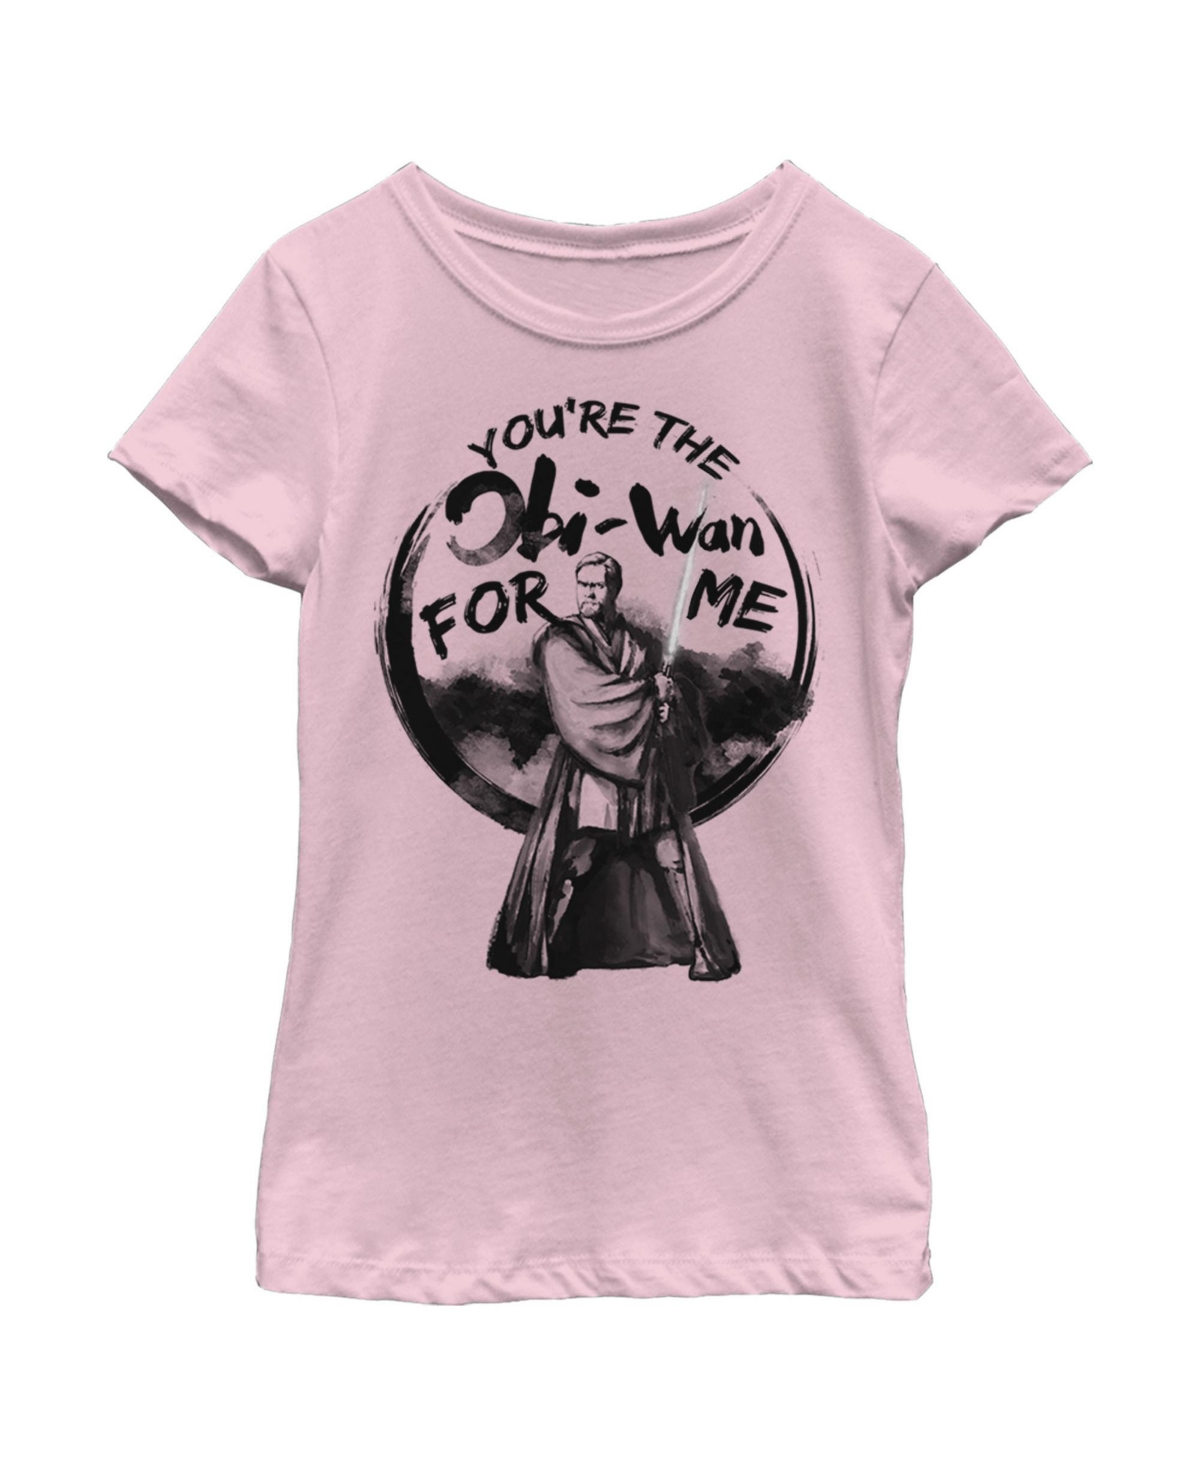 Disney Lucasfilm Girl's Star Wars You're The Obi-wan For Me Child T-shirt In Light Pink